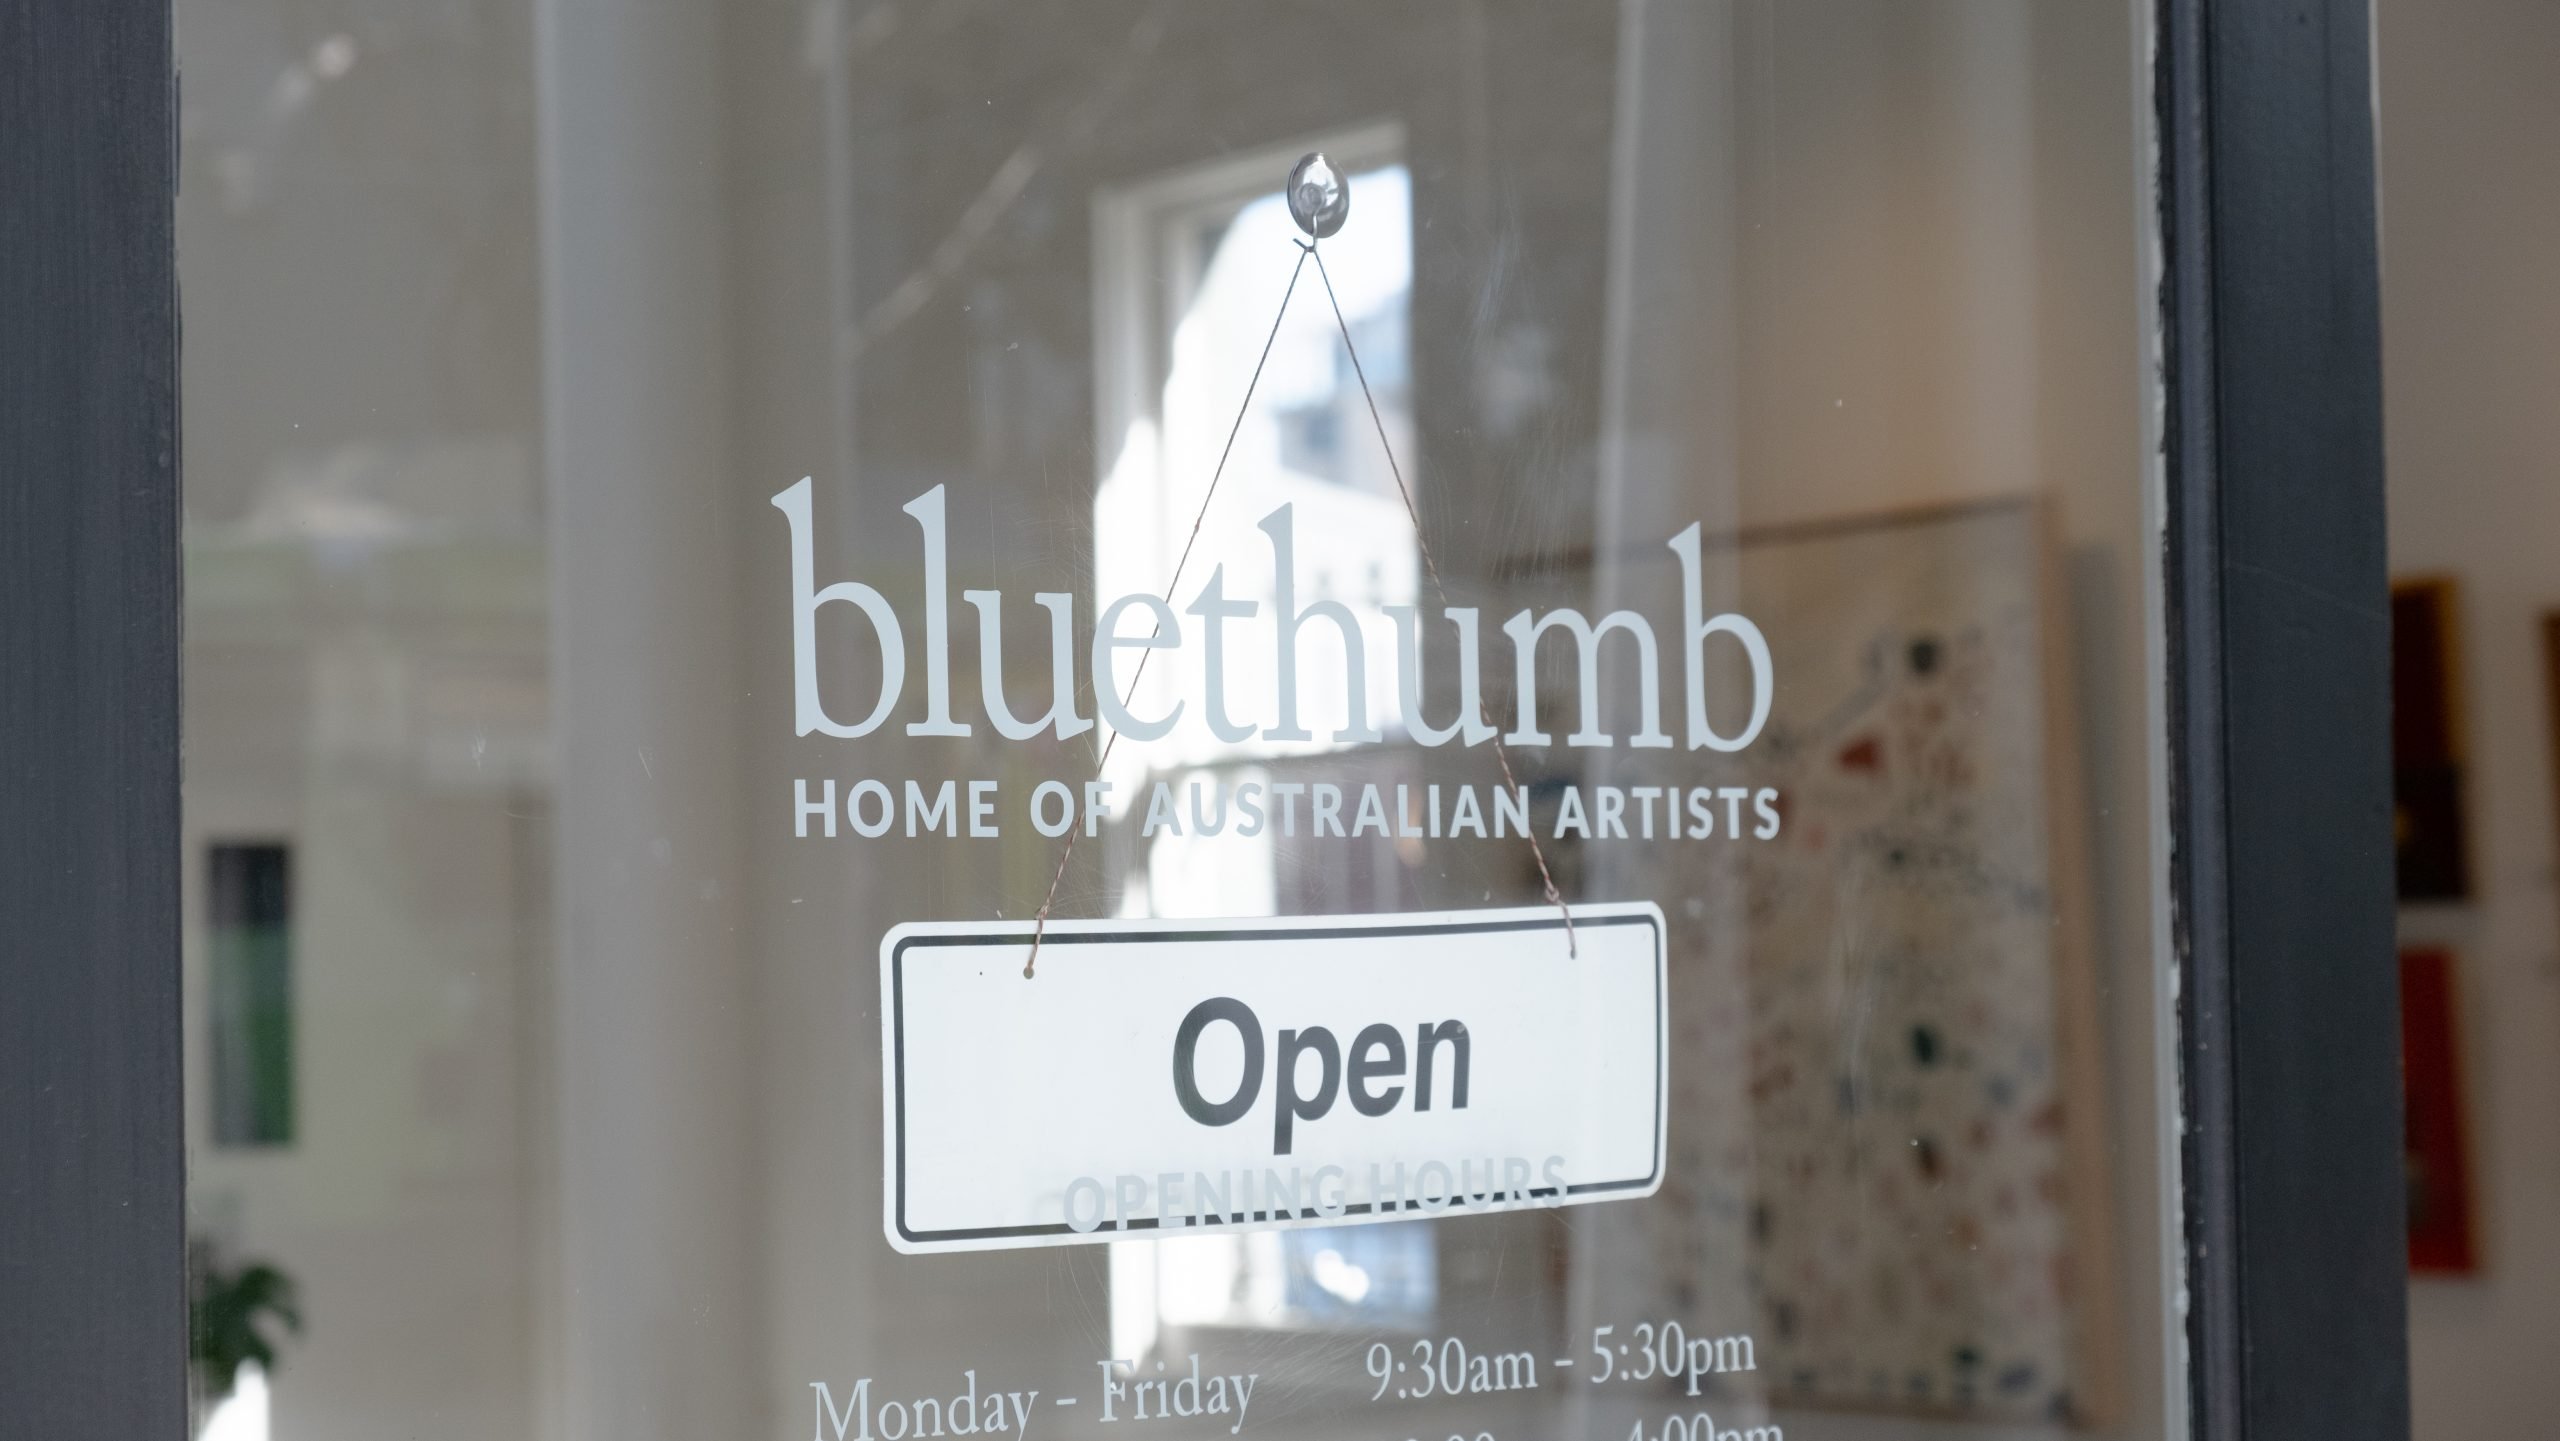 Bluethumb Melbourne Gallery Entrance, With Michael Wolfe's Artwork In The Window.